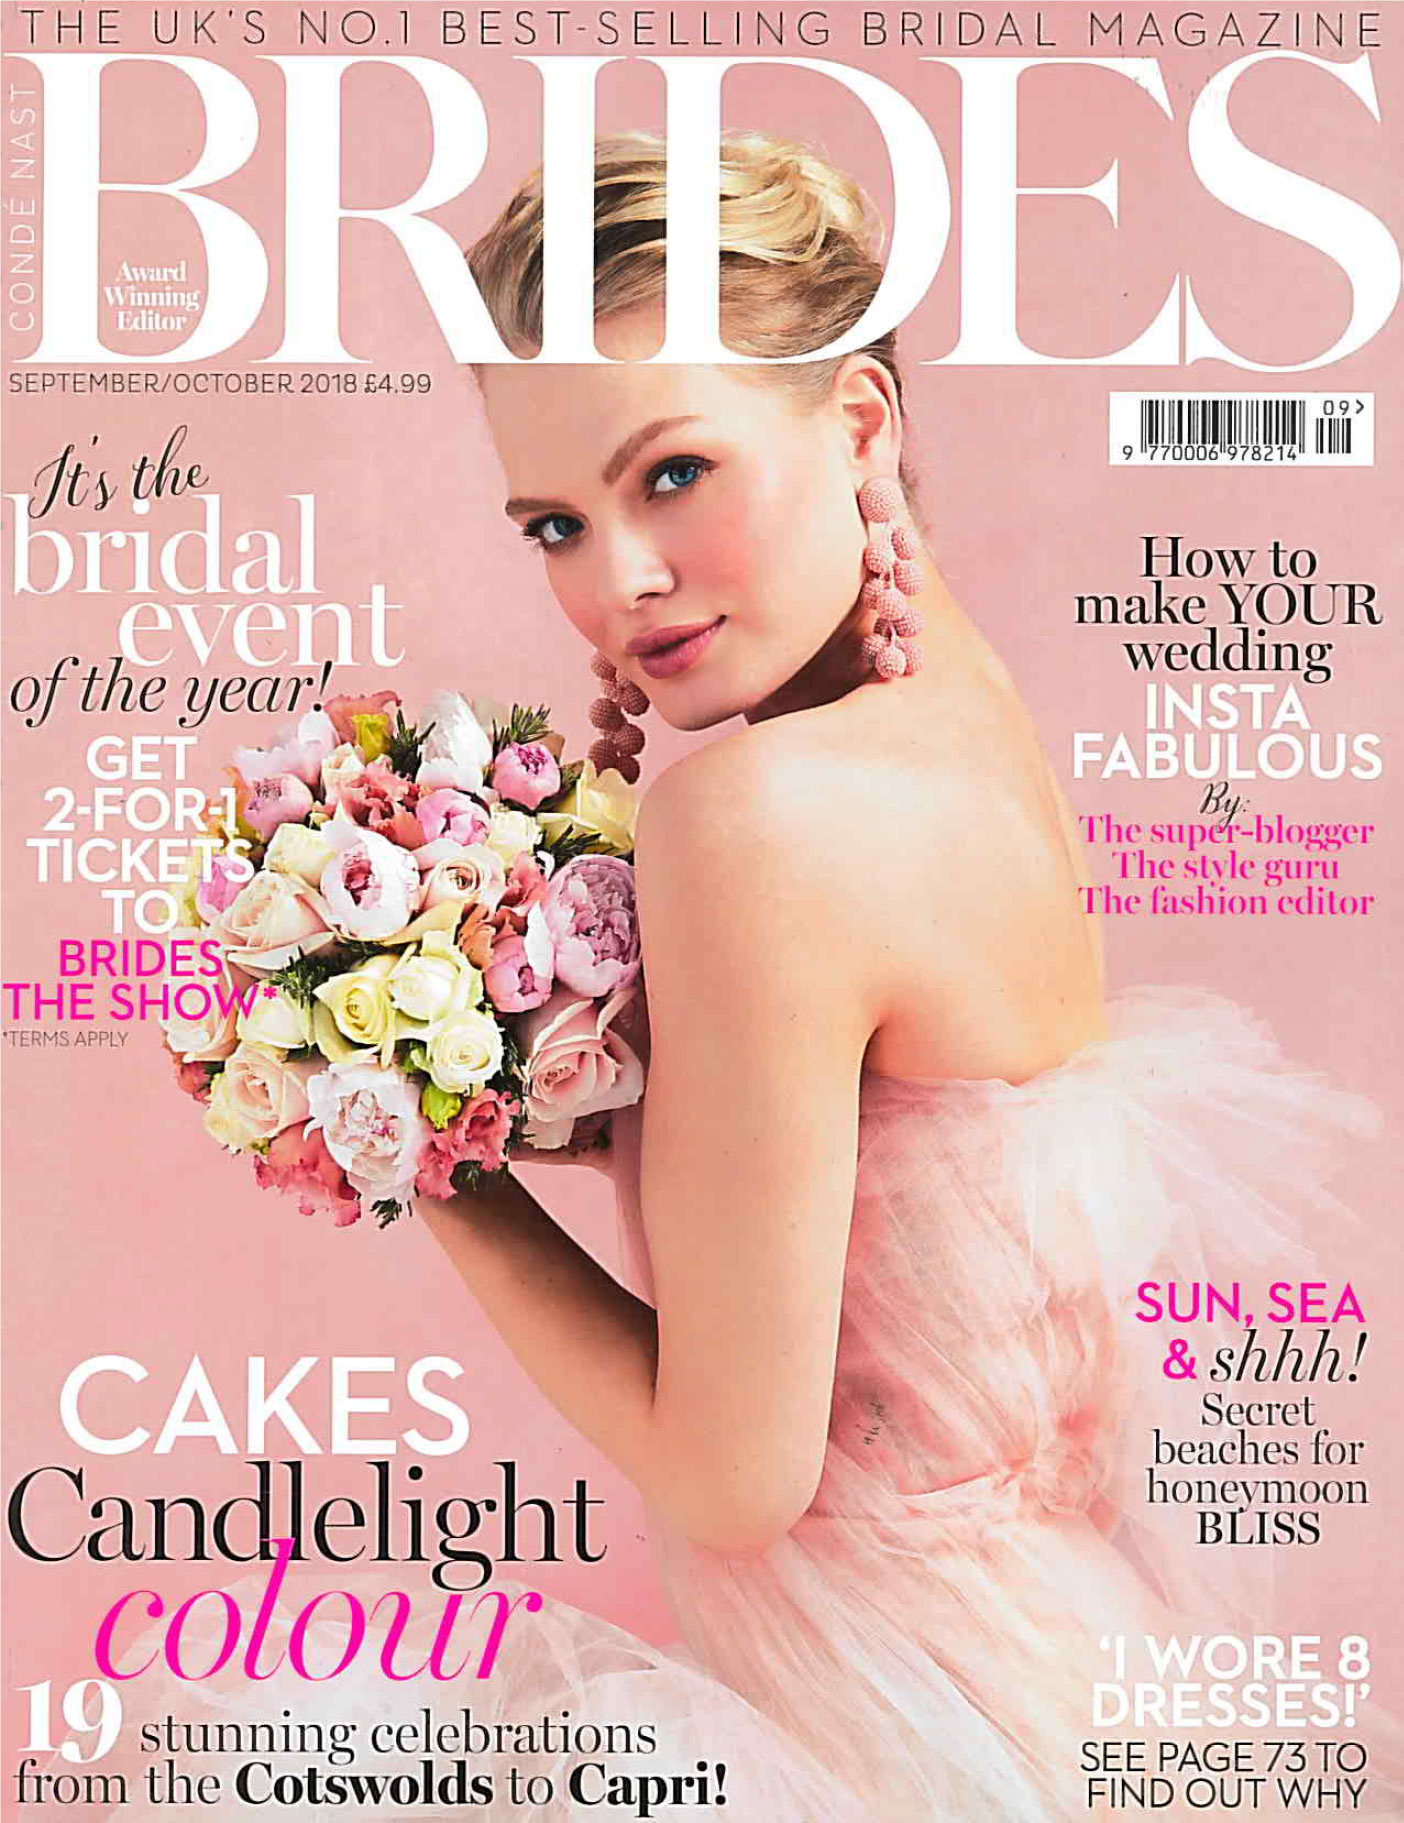 as seen in brides - christiane dowling make up artistry